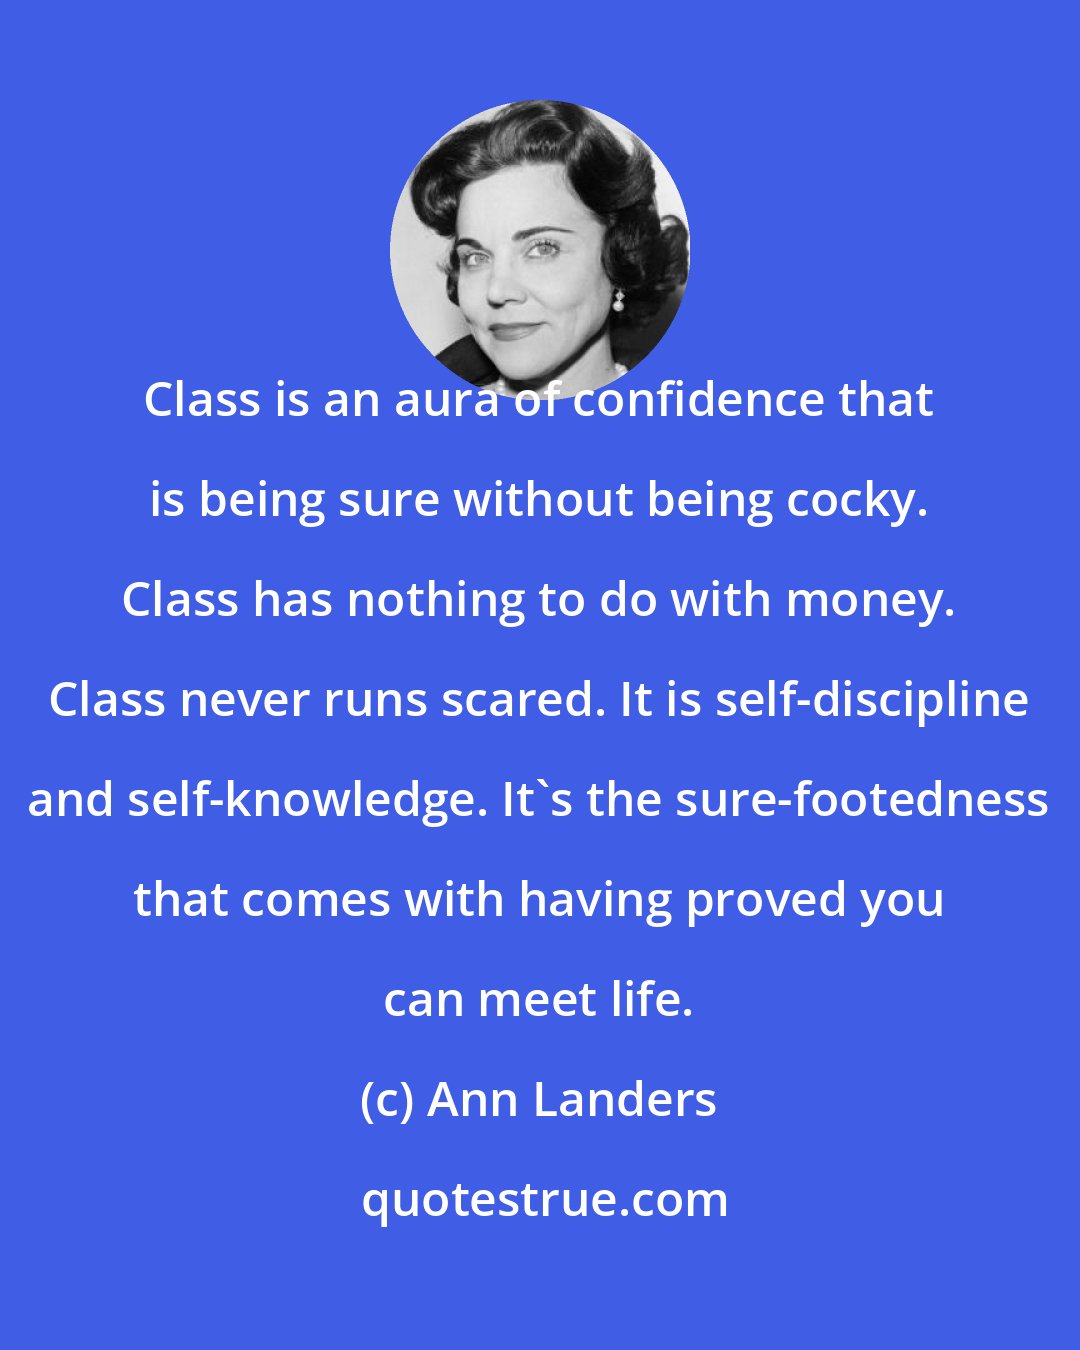 Ann Landers: Class is an aura of confidence that is being sure without being cocky. Class has nothing to do with money. Class never runs scared. It is self-discipline and self-knowledge. It's the sure-footedness that comes with having proved you can meet life.